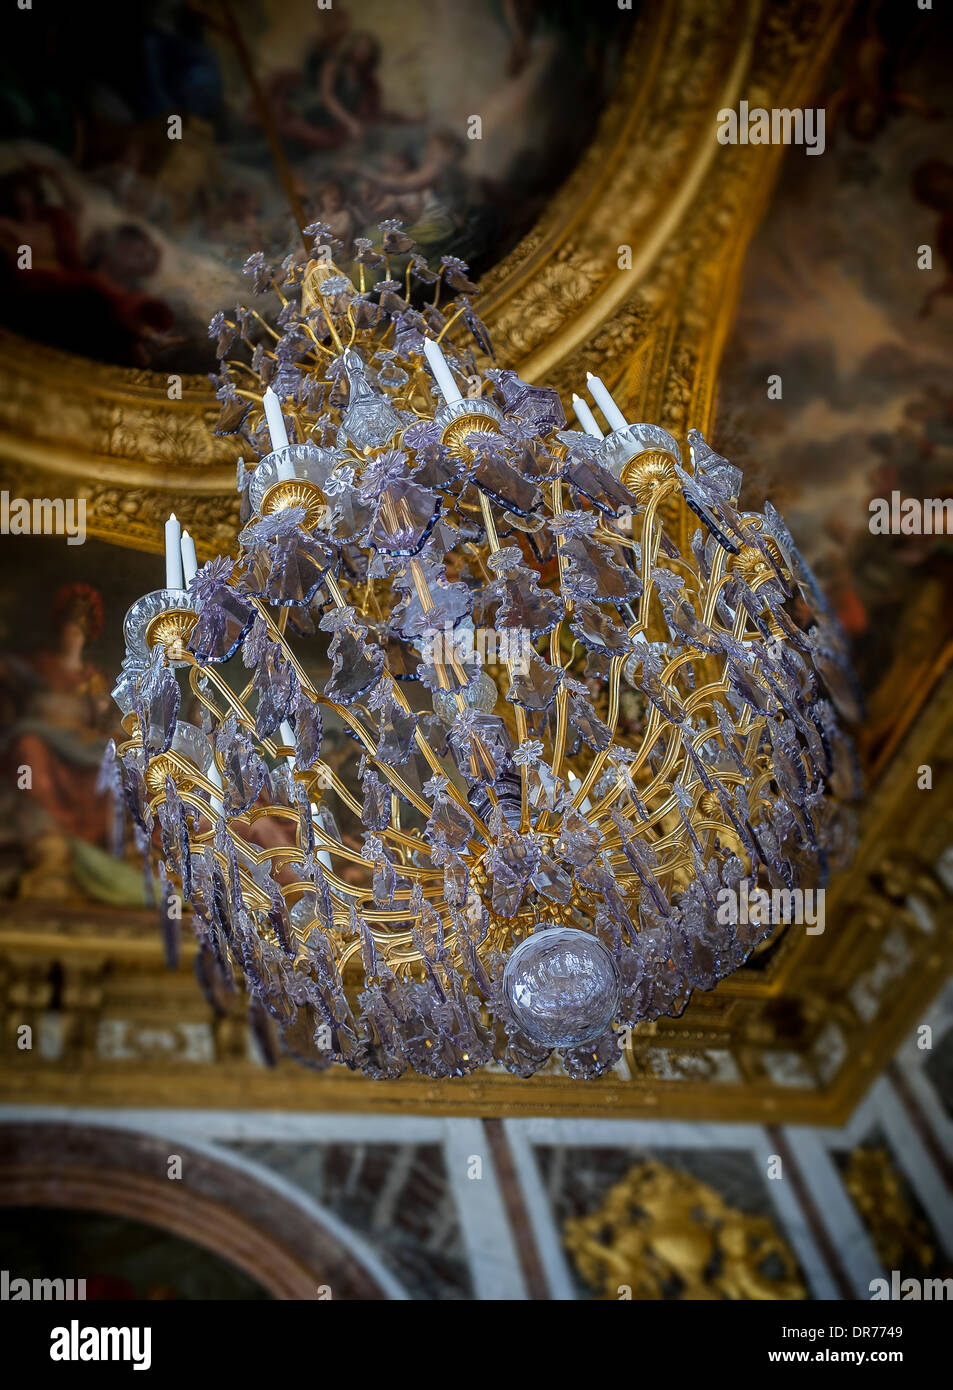 chandelier hangs in the hall of mirrors at versailles palace paris france Stock Photo